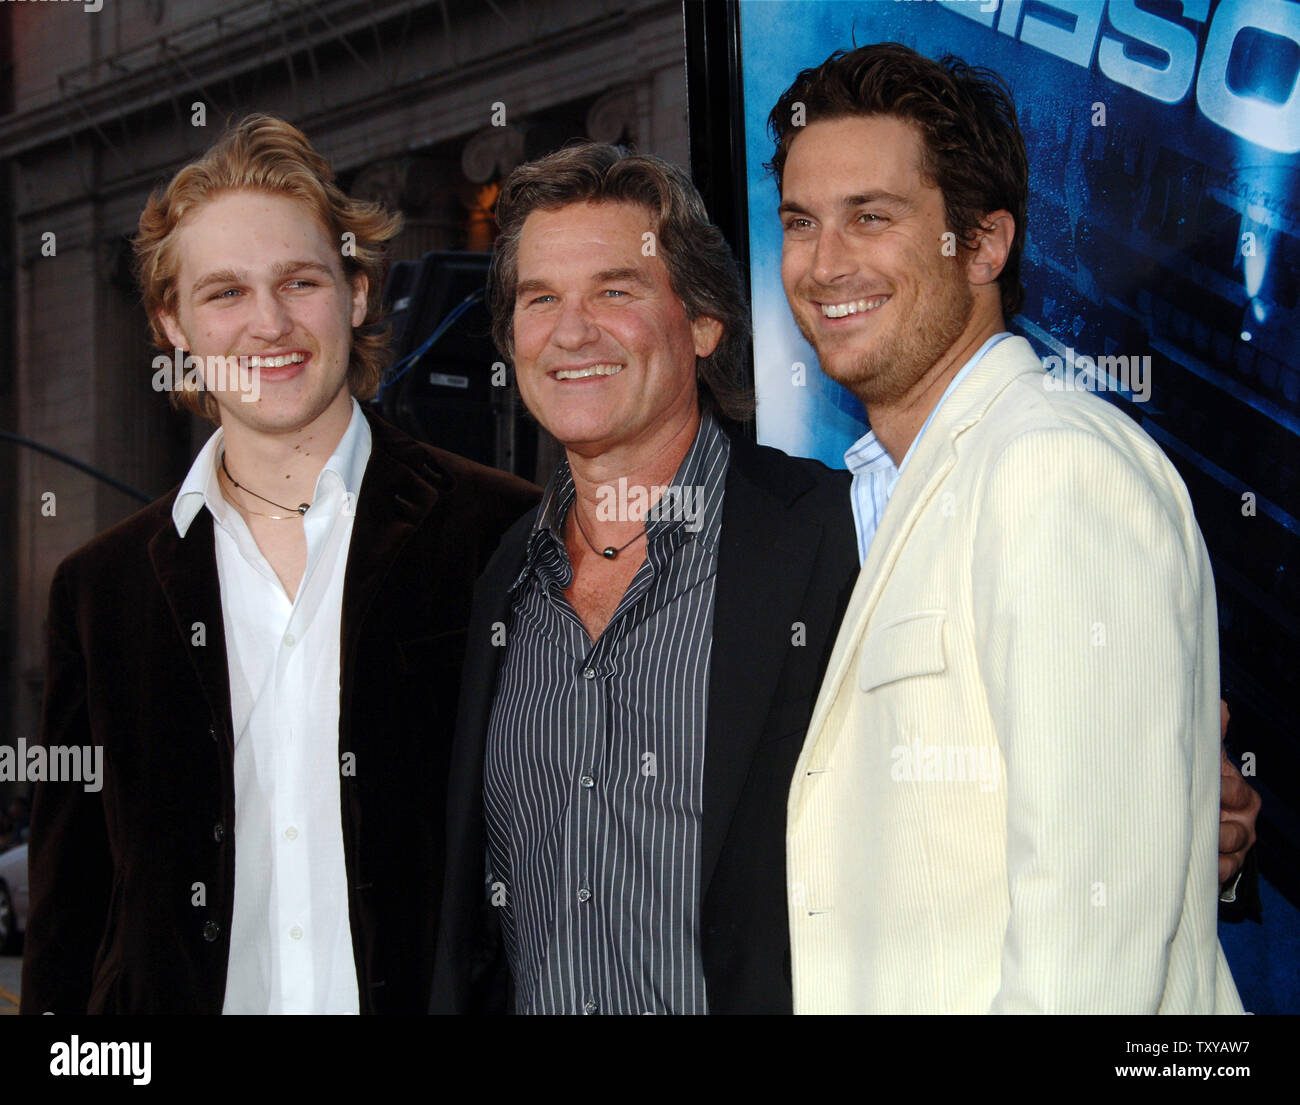 Cast member Kurt Russell (C) arrives accompanied by his son Wyatt (L) and  his stepson Oliver Hudson for the premiere of the motion picture drama  "Poseidon" at Grauman's Chinese Theatre in the